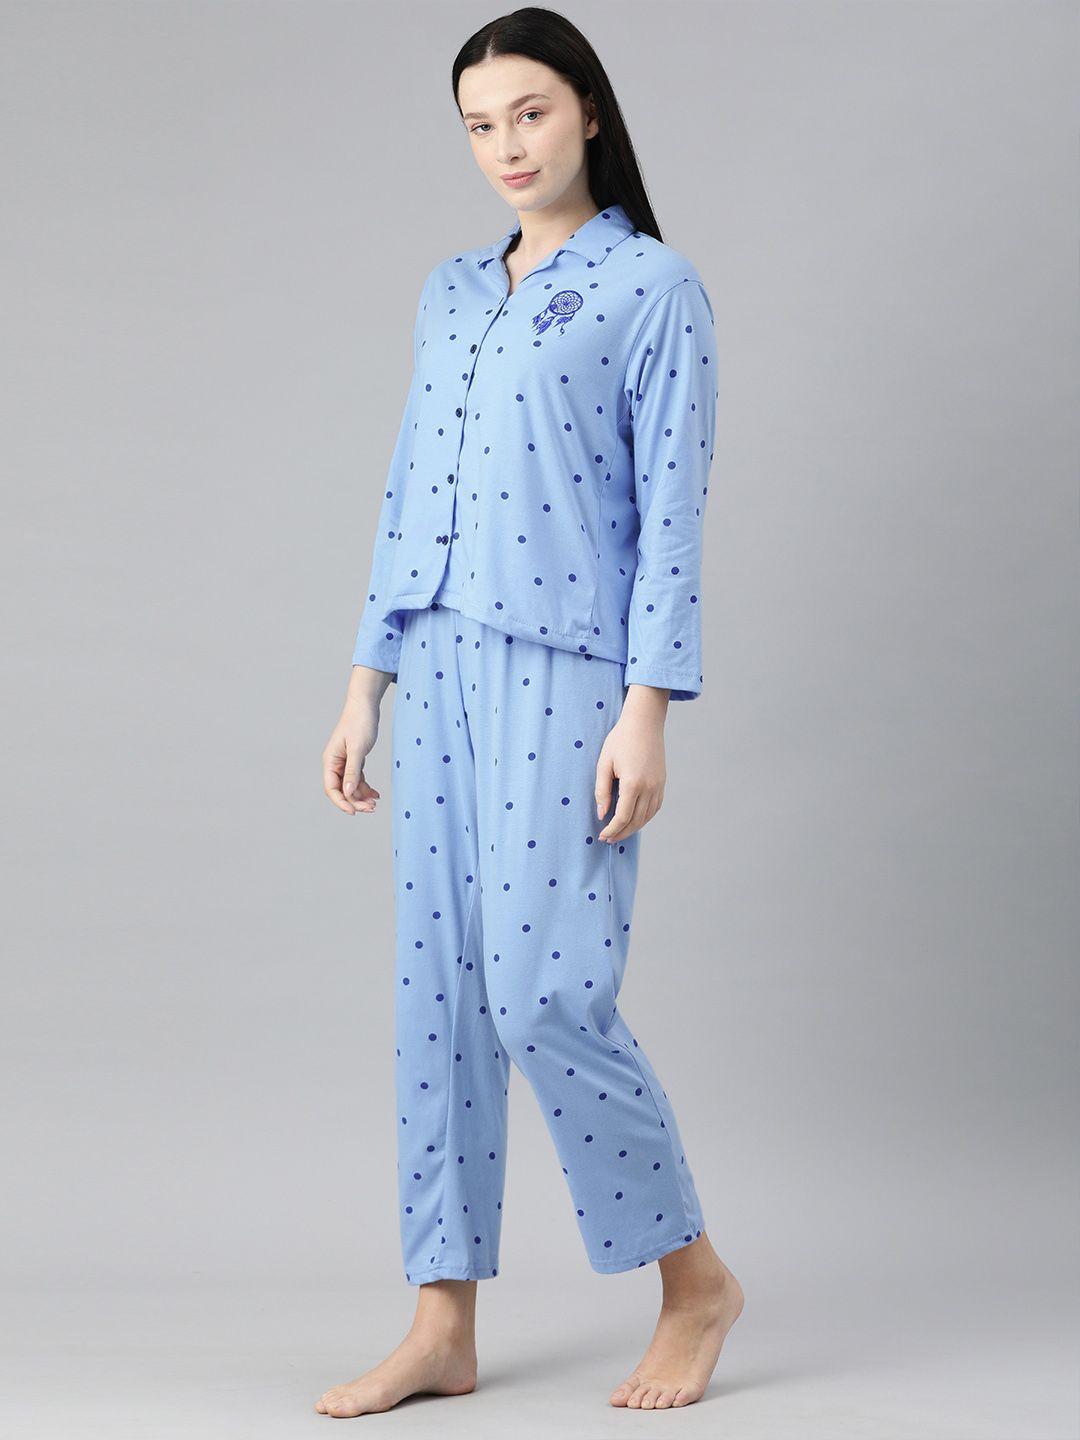 campus sutra women blue polka dots printed pure cotton night suit